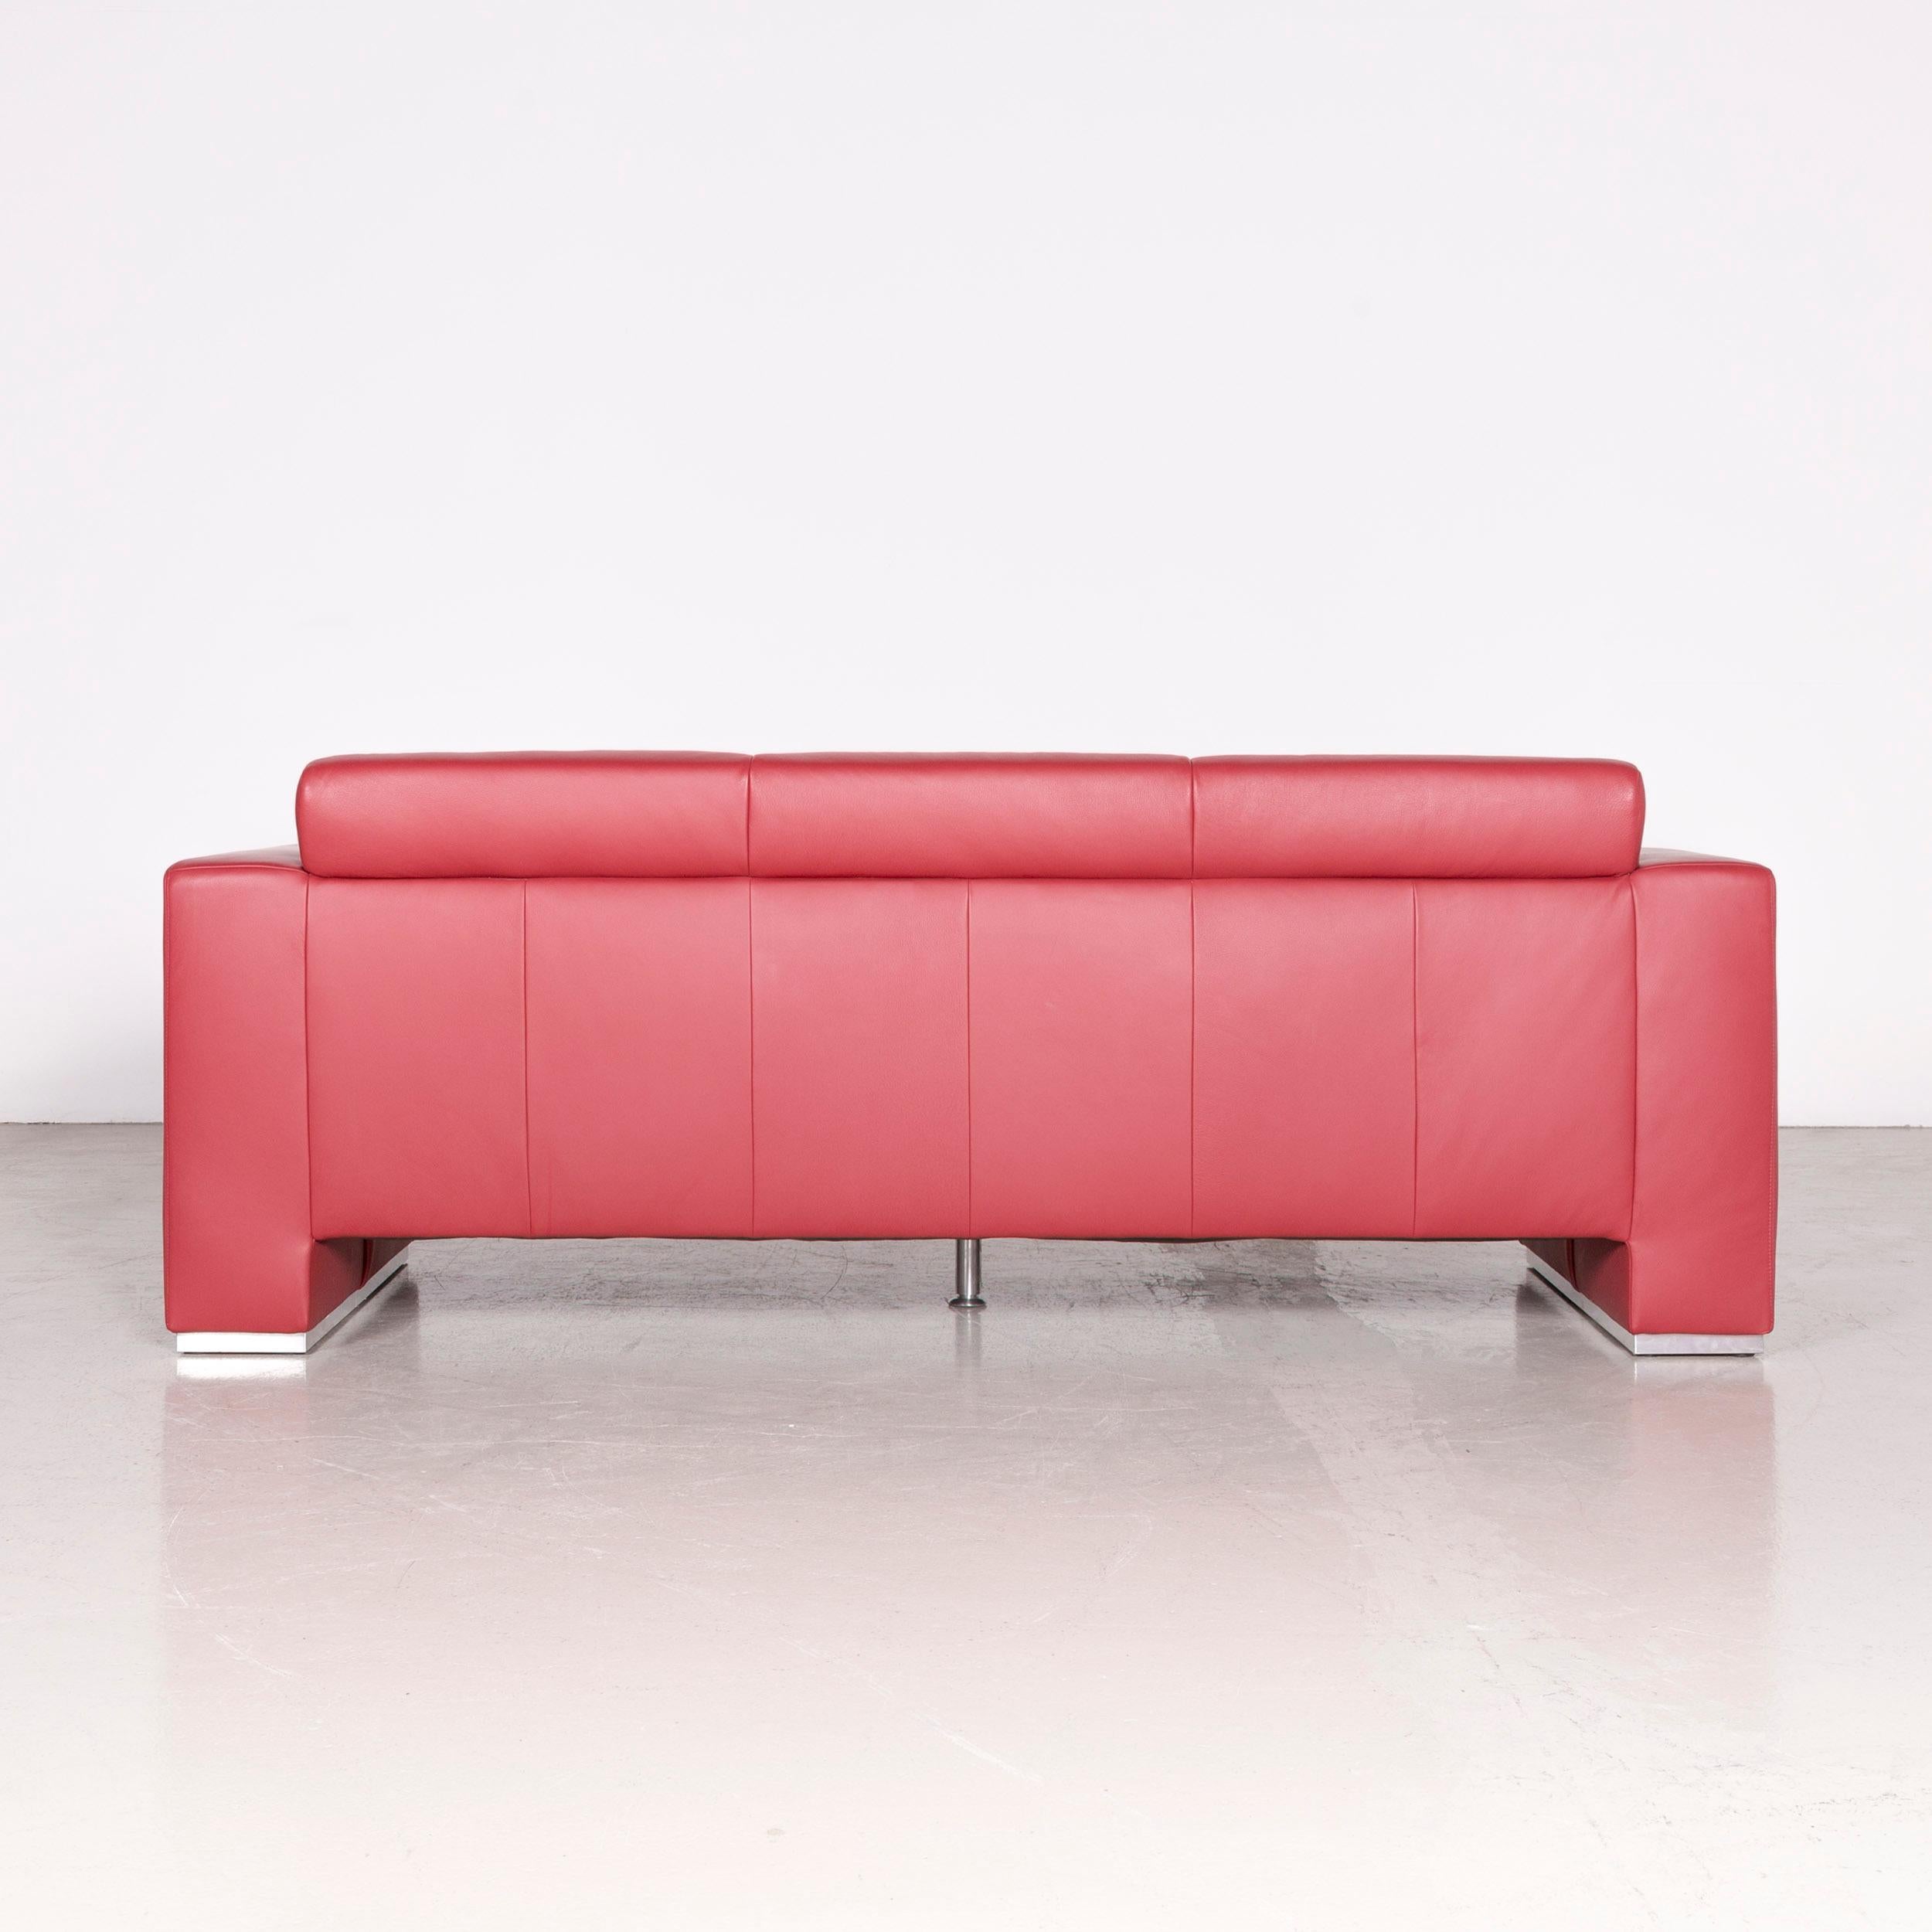 Koinor Nove Designer Leather Sofa Red Two-Seat Couch 4